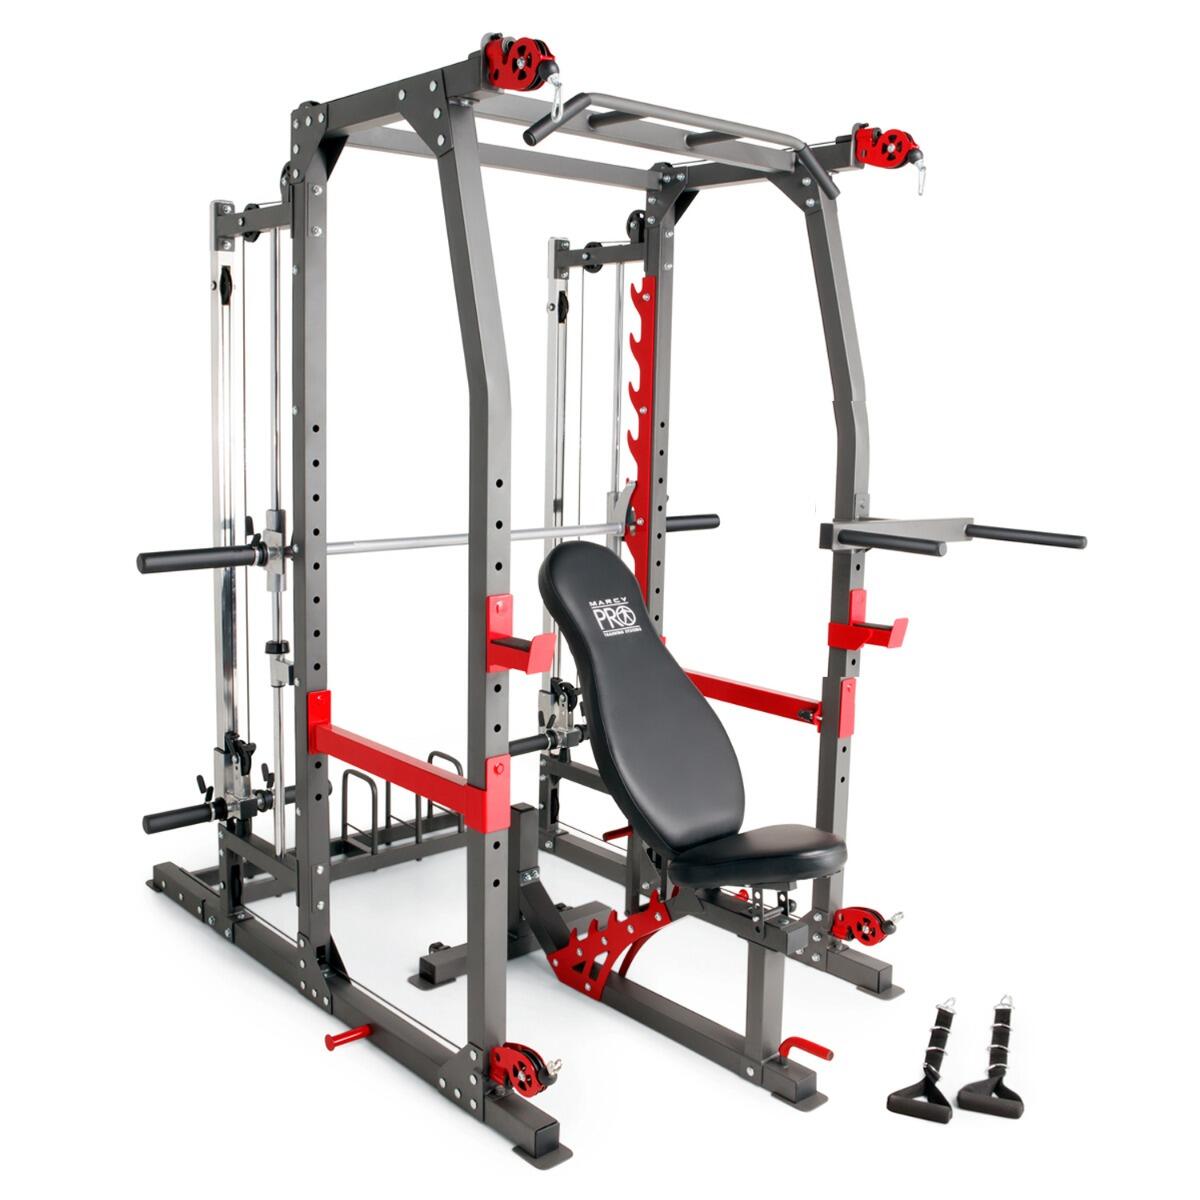 MARCY PRO SM4903 MULTI GYM CAGE SMITH MACHINE & ADJUSTABLE WEIGHT BENCH 1/7